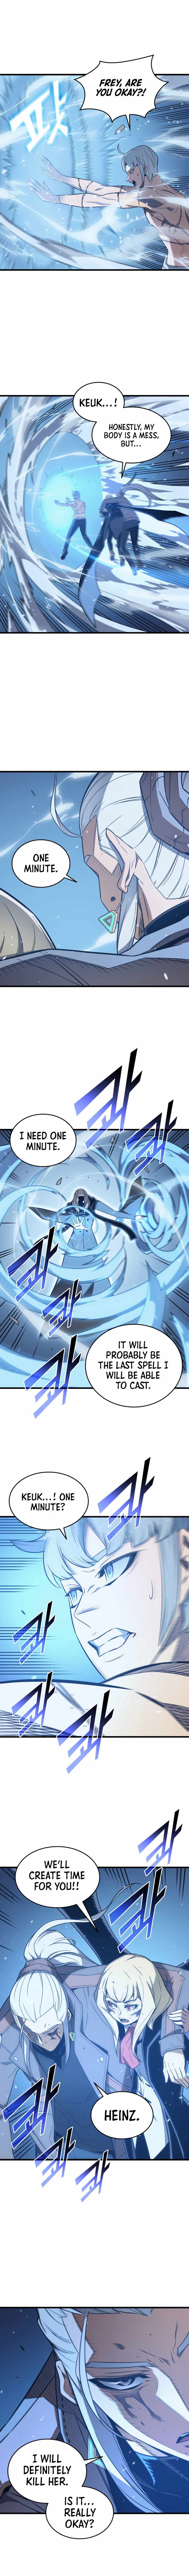 the great mage returns after 4000 years Chapter 122,The Archmage Returns After 4000 Years chapter 122